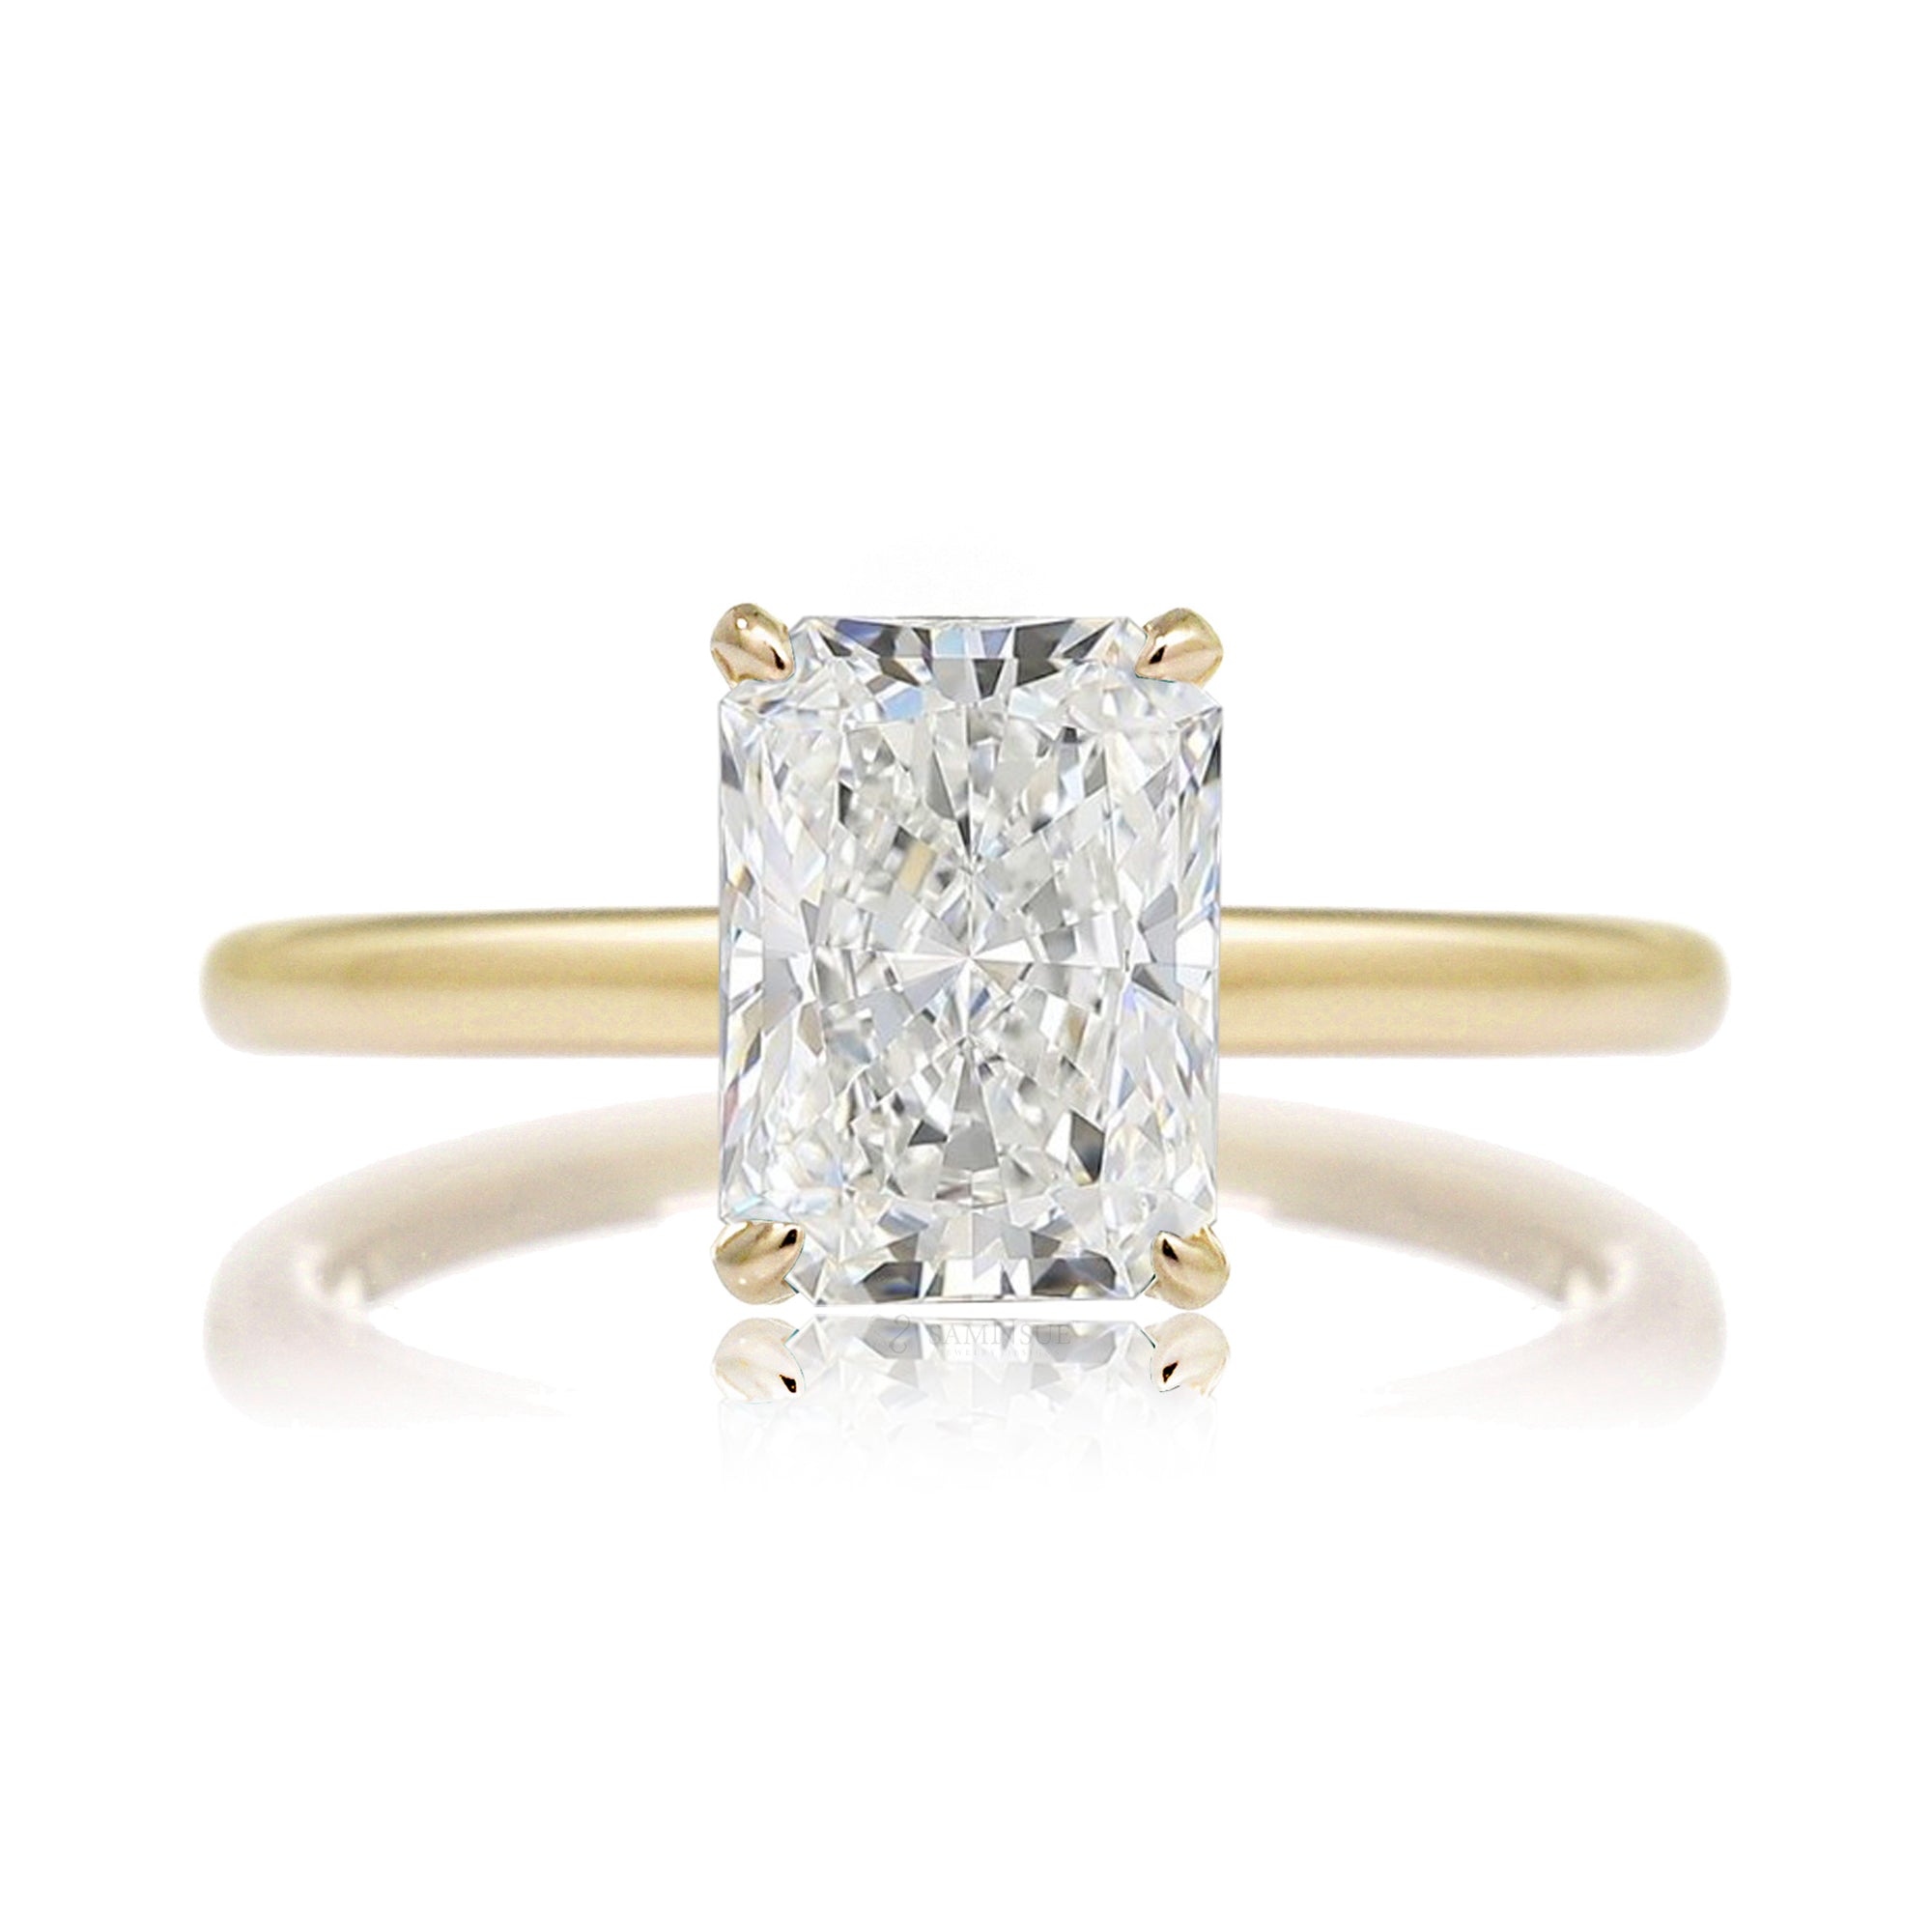 Radiant cut solitaire engagement ring diamond hidden halo solid band in yellow gold